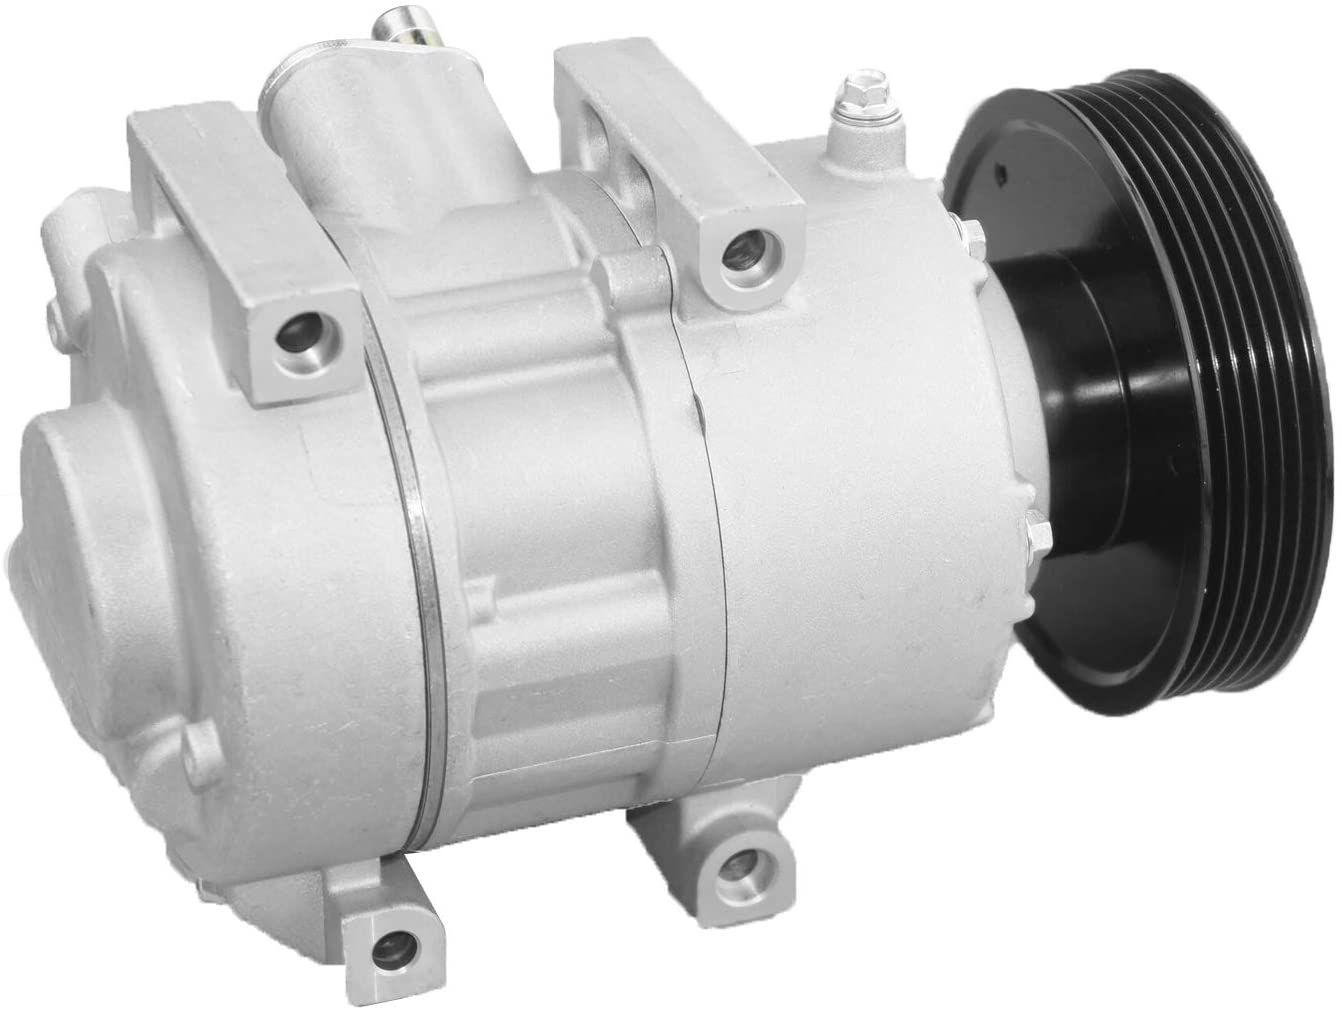 MGPRO A/C Compressor & Clutch Compatible with 2018 Tucson Sport 2017-19 Sportage SX 2017-19 Sportage SX Turbo 2017-19 Sportage LX 2017-19 Sportage EX 2017-19 Sportage EX Pack 2017-19 Sportage SXL